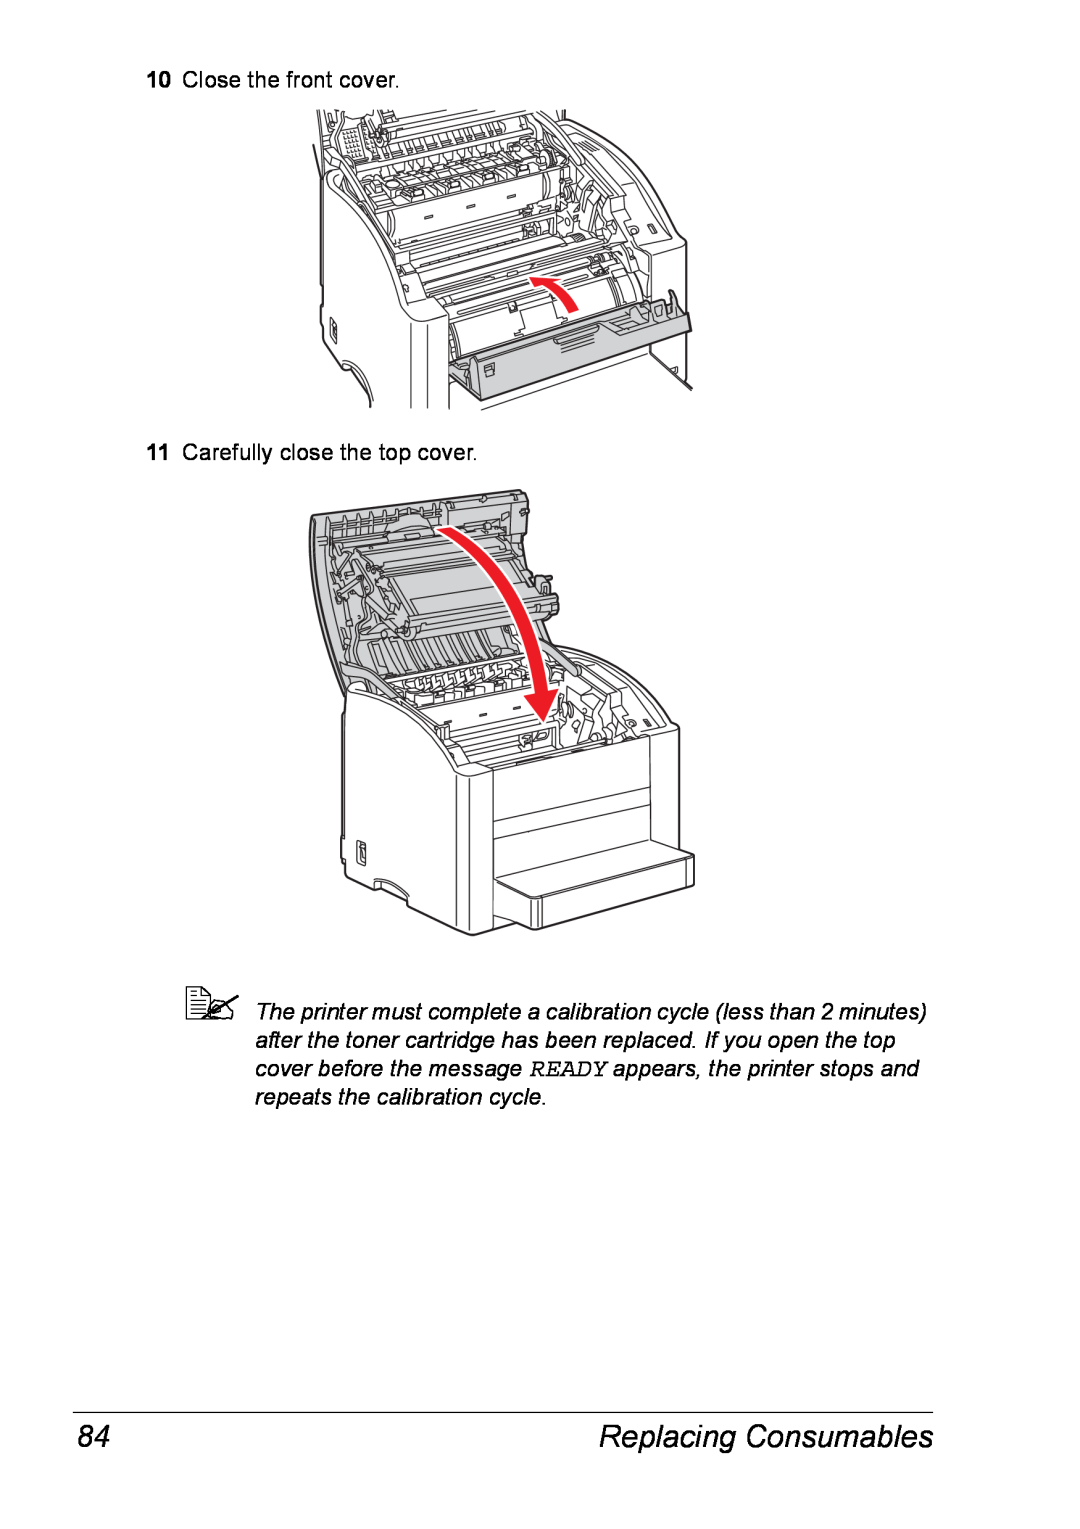 Xerox 6120 manual Replacing Consumables, Close the front cover 11 Carefully close the top cover 